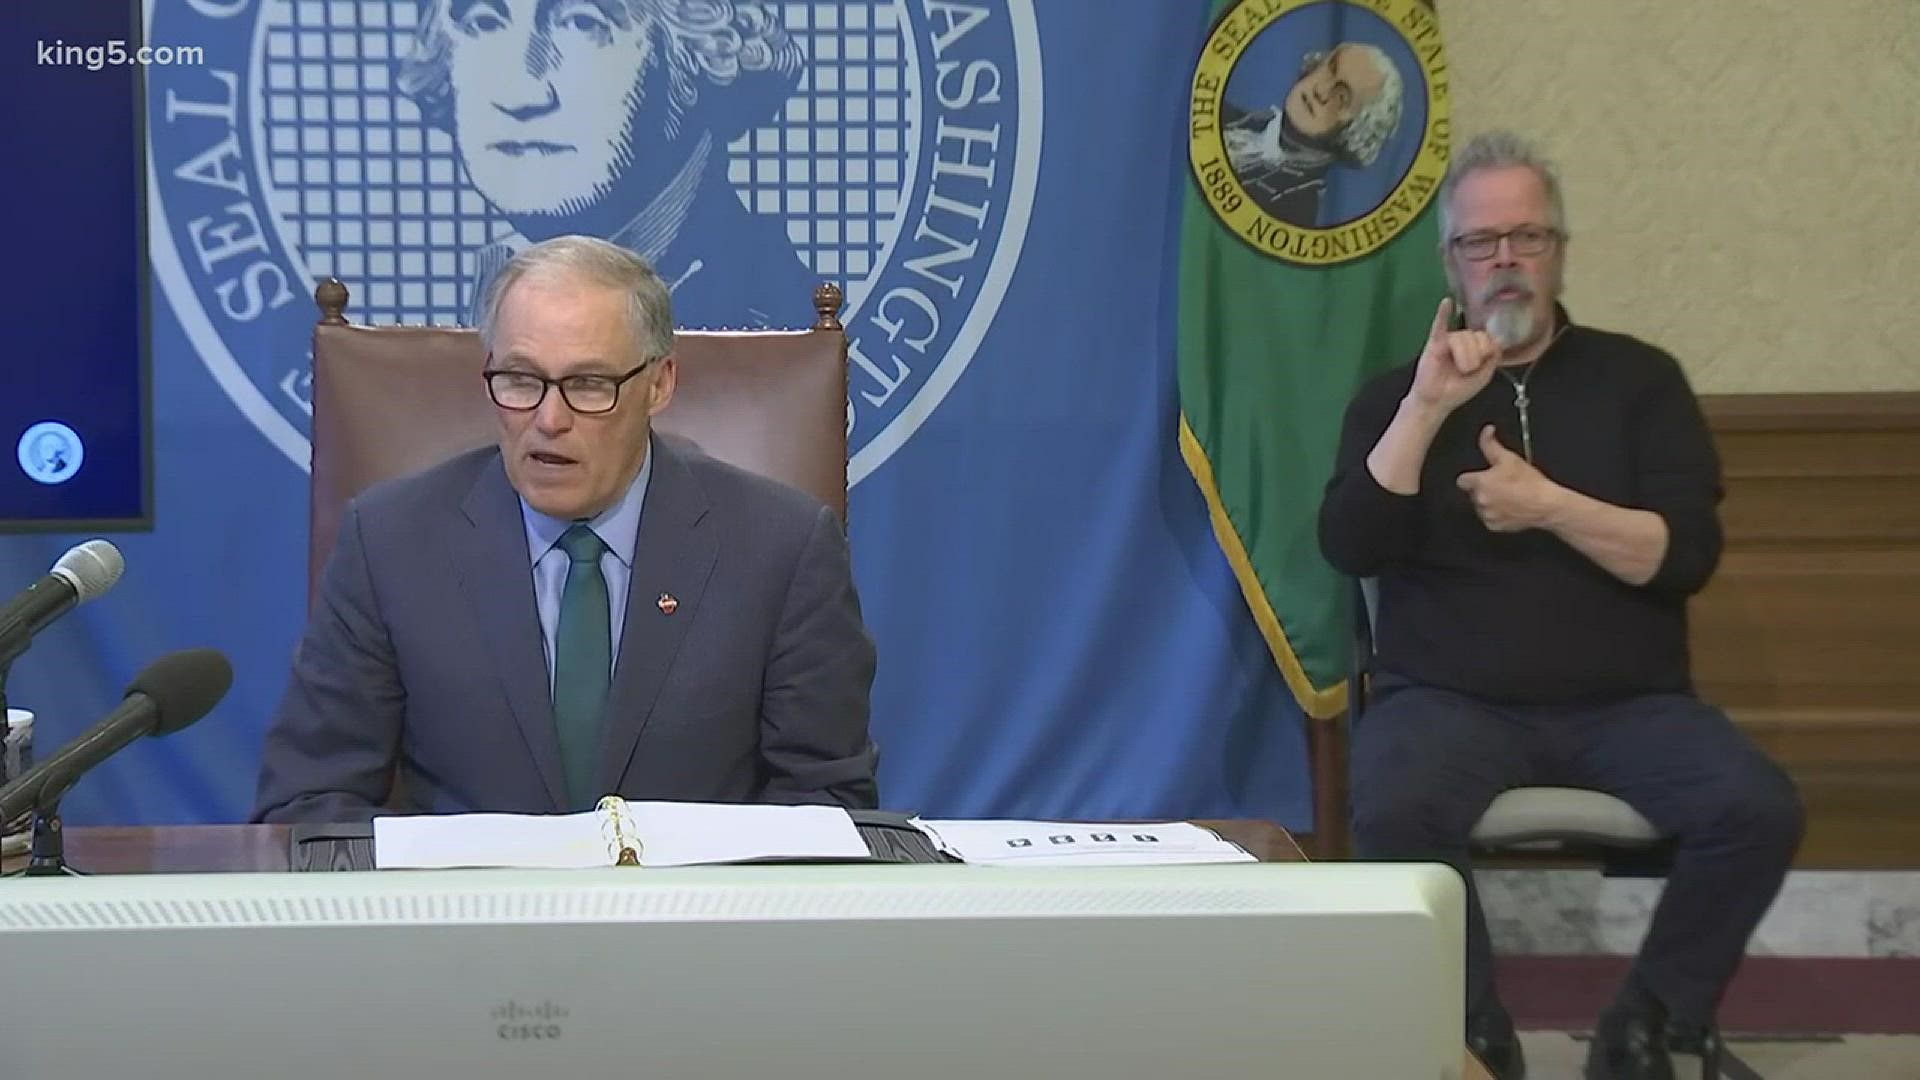 Washington's stay-at-home orders are extended to May 31. Gov. Inslee outline a 4-phase approach to gradually reopening.